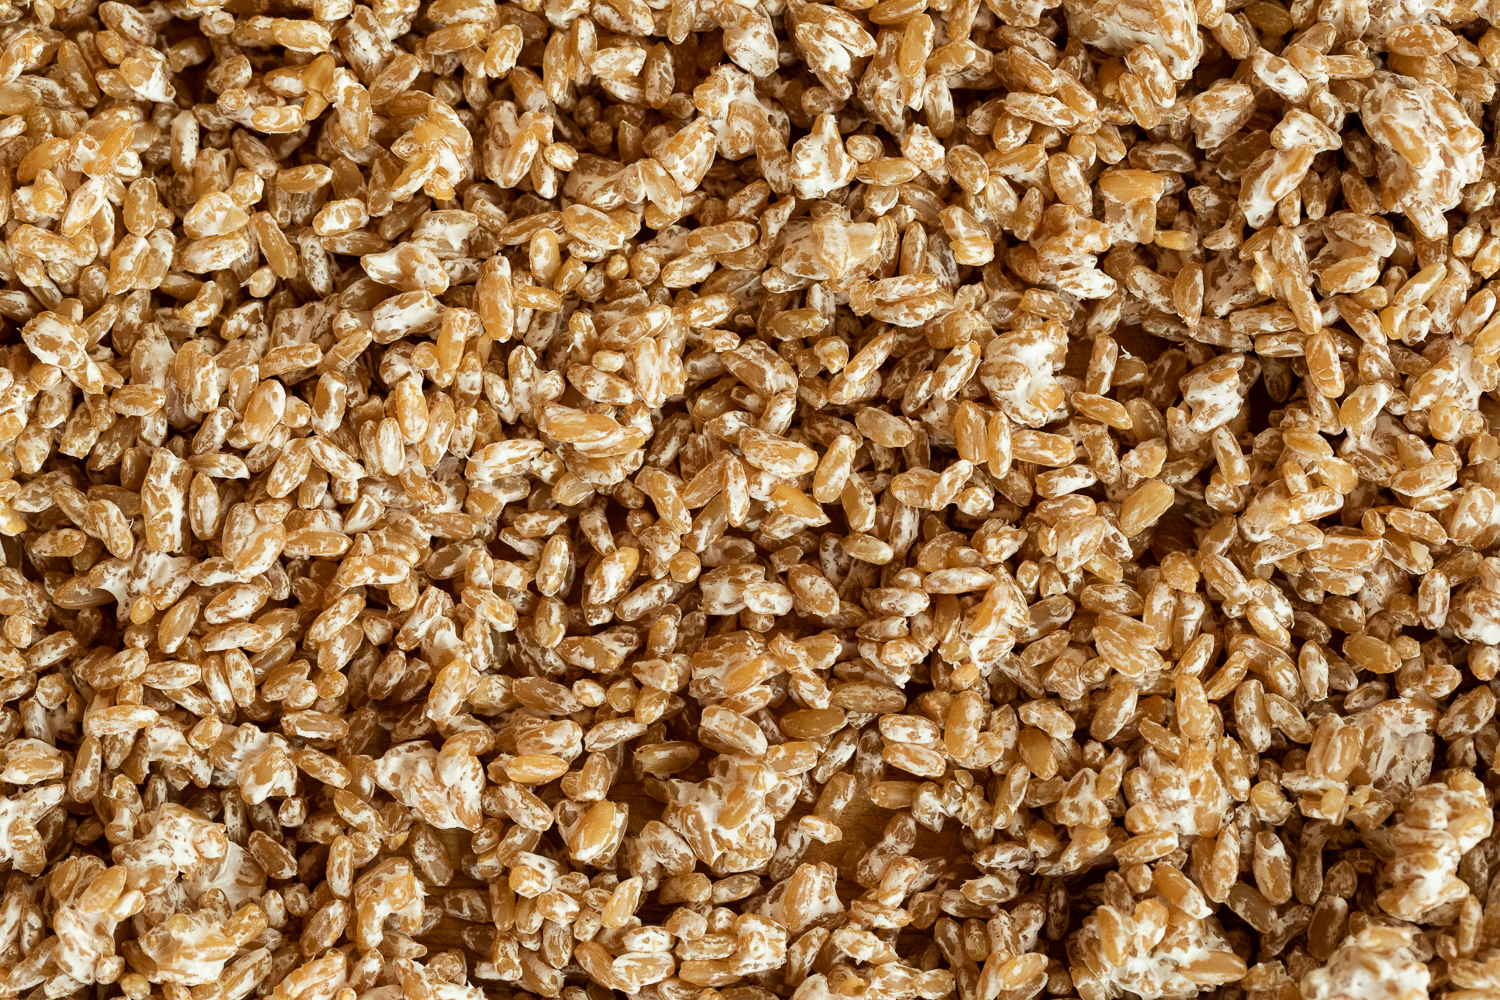 A close up image of a brown granola.